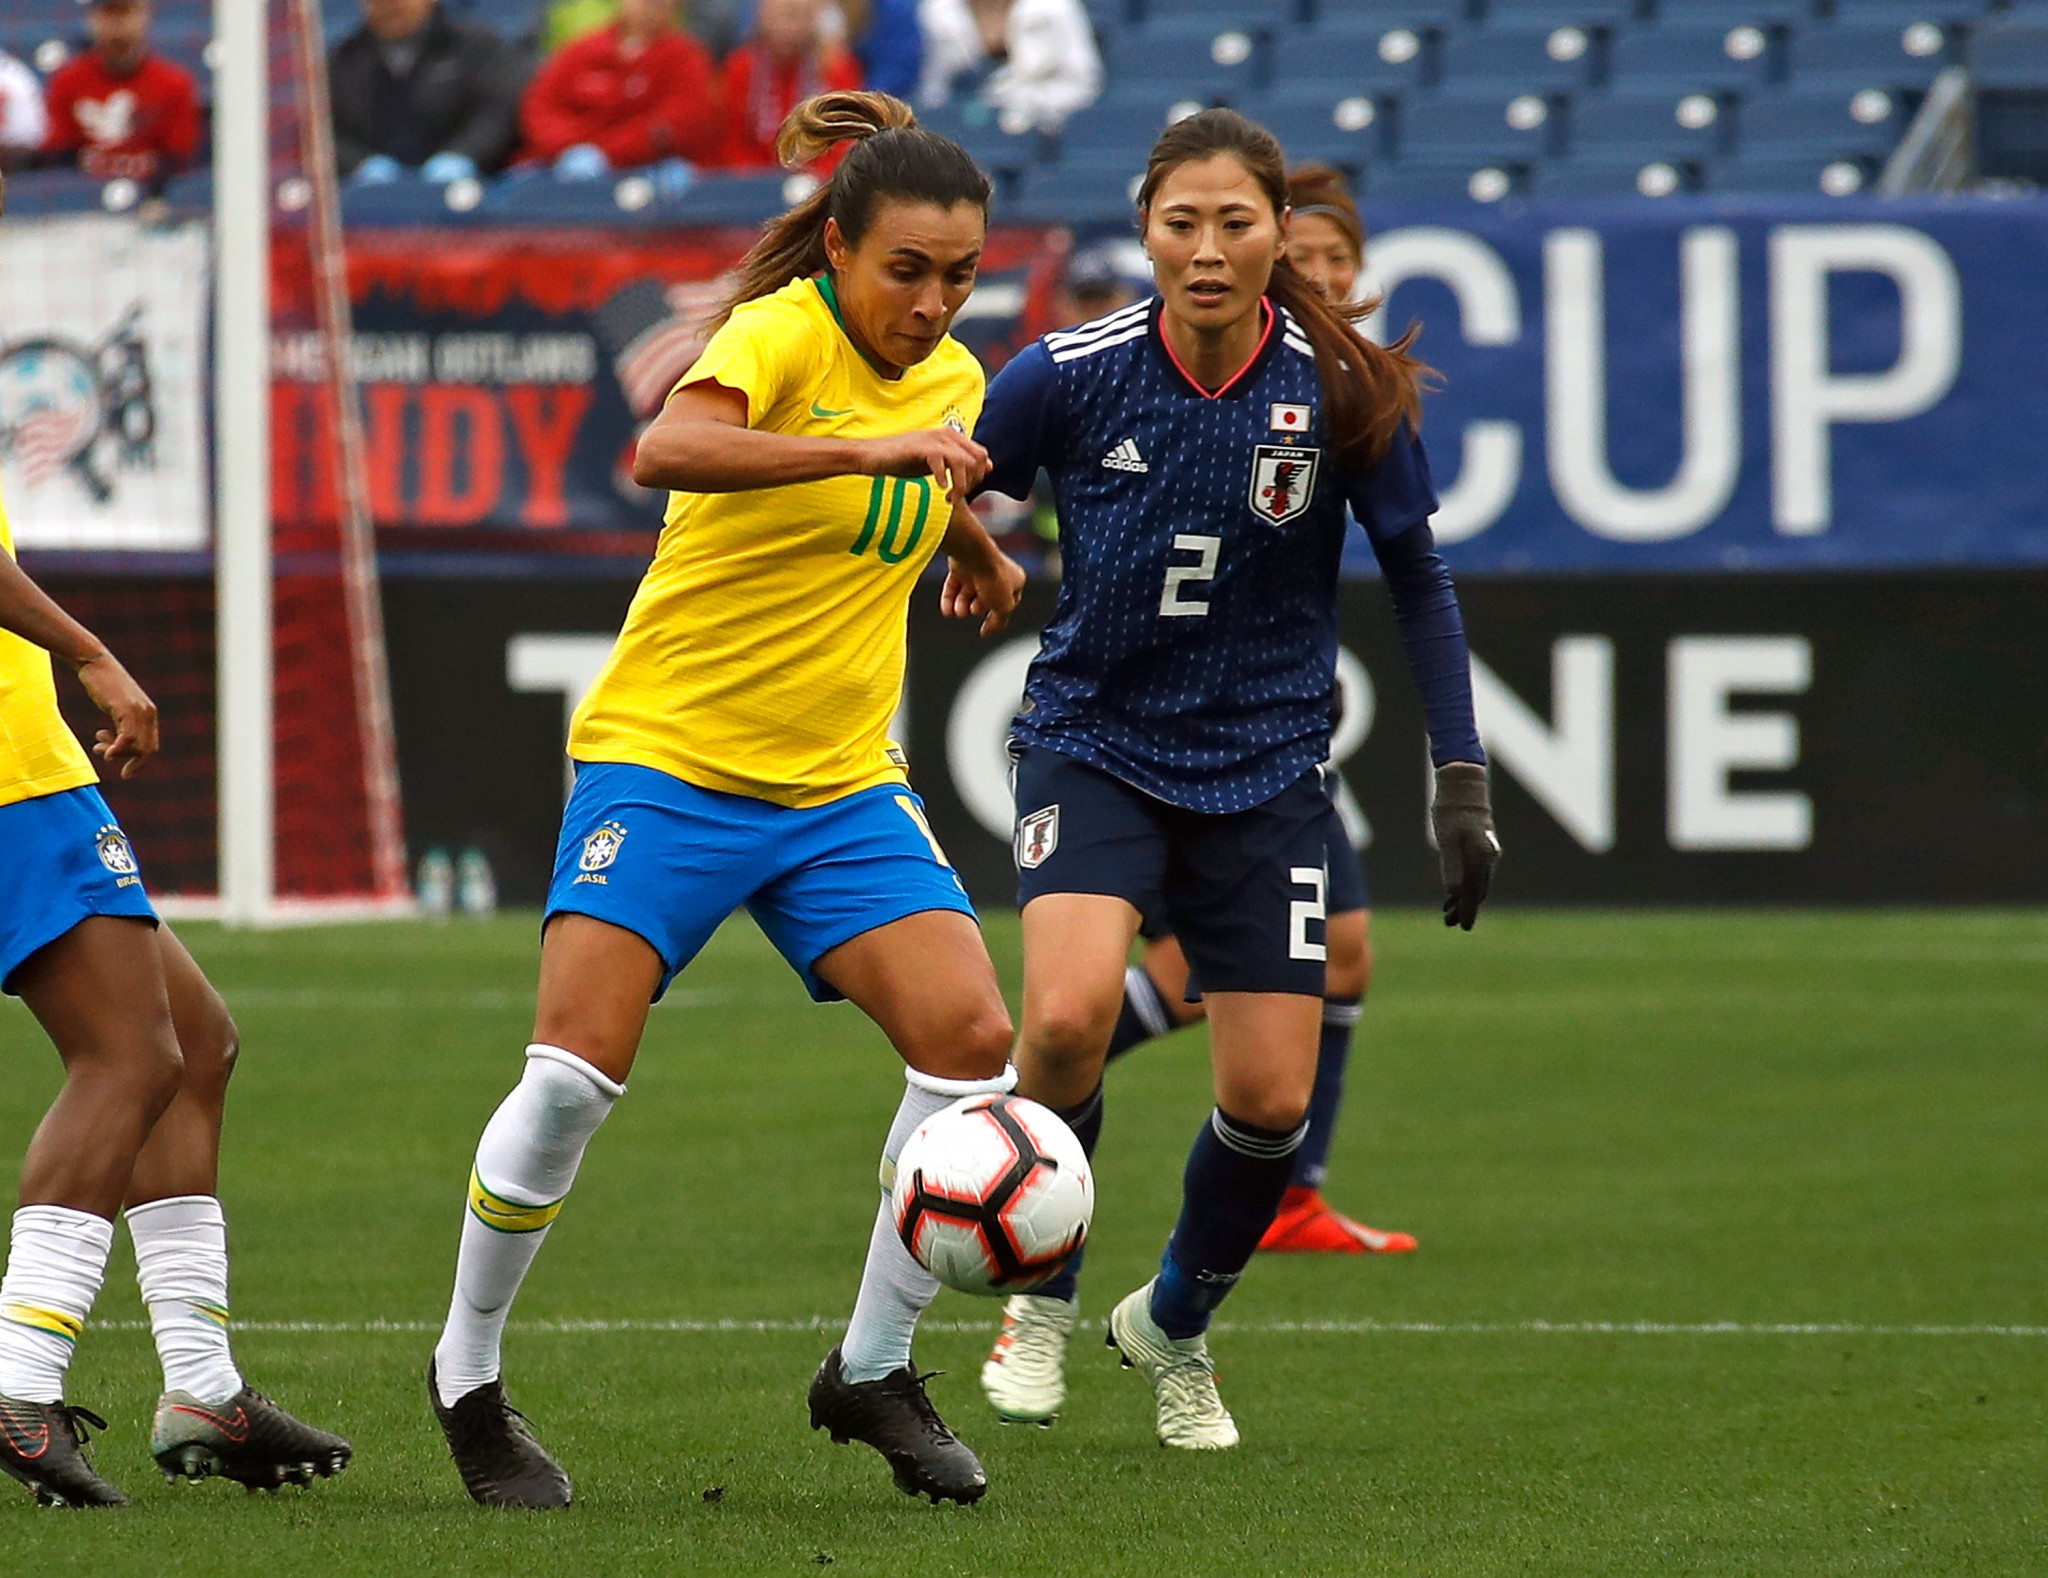 The Brazilian women’s national football team has taken up teqball in the lead-up to this year's FIFA World Cup in France ©Getty Images